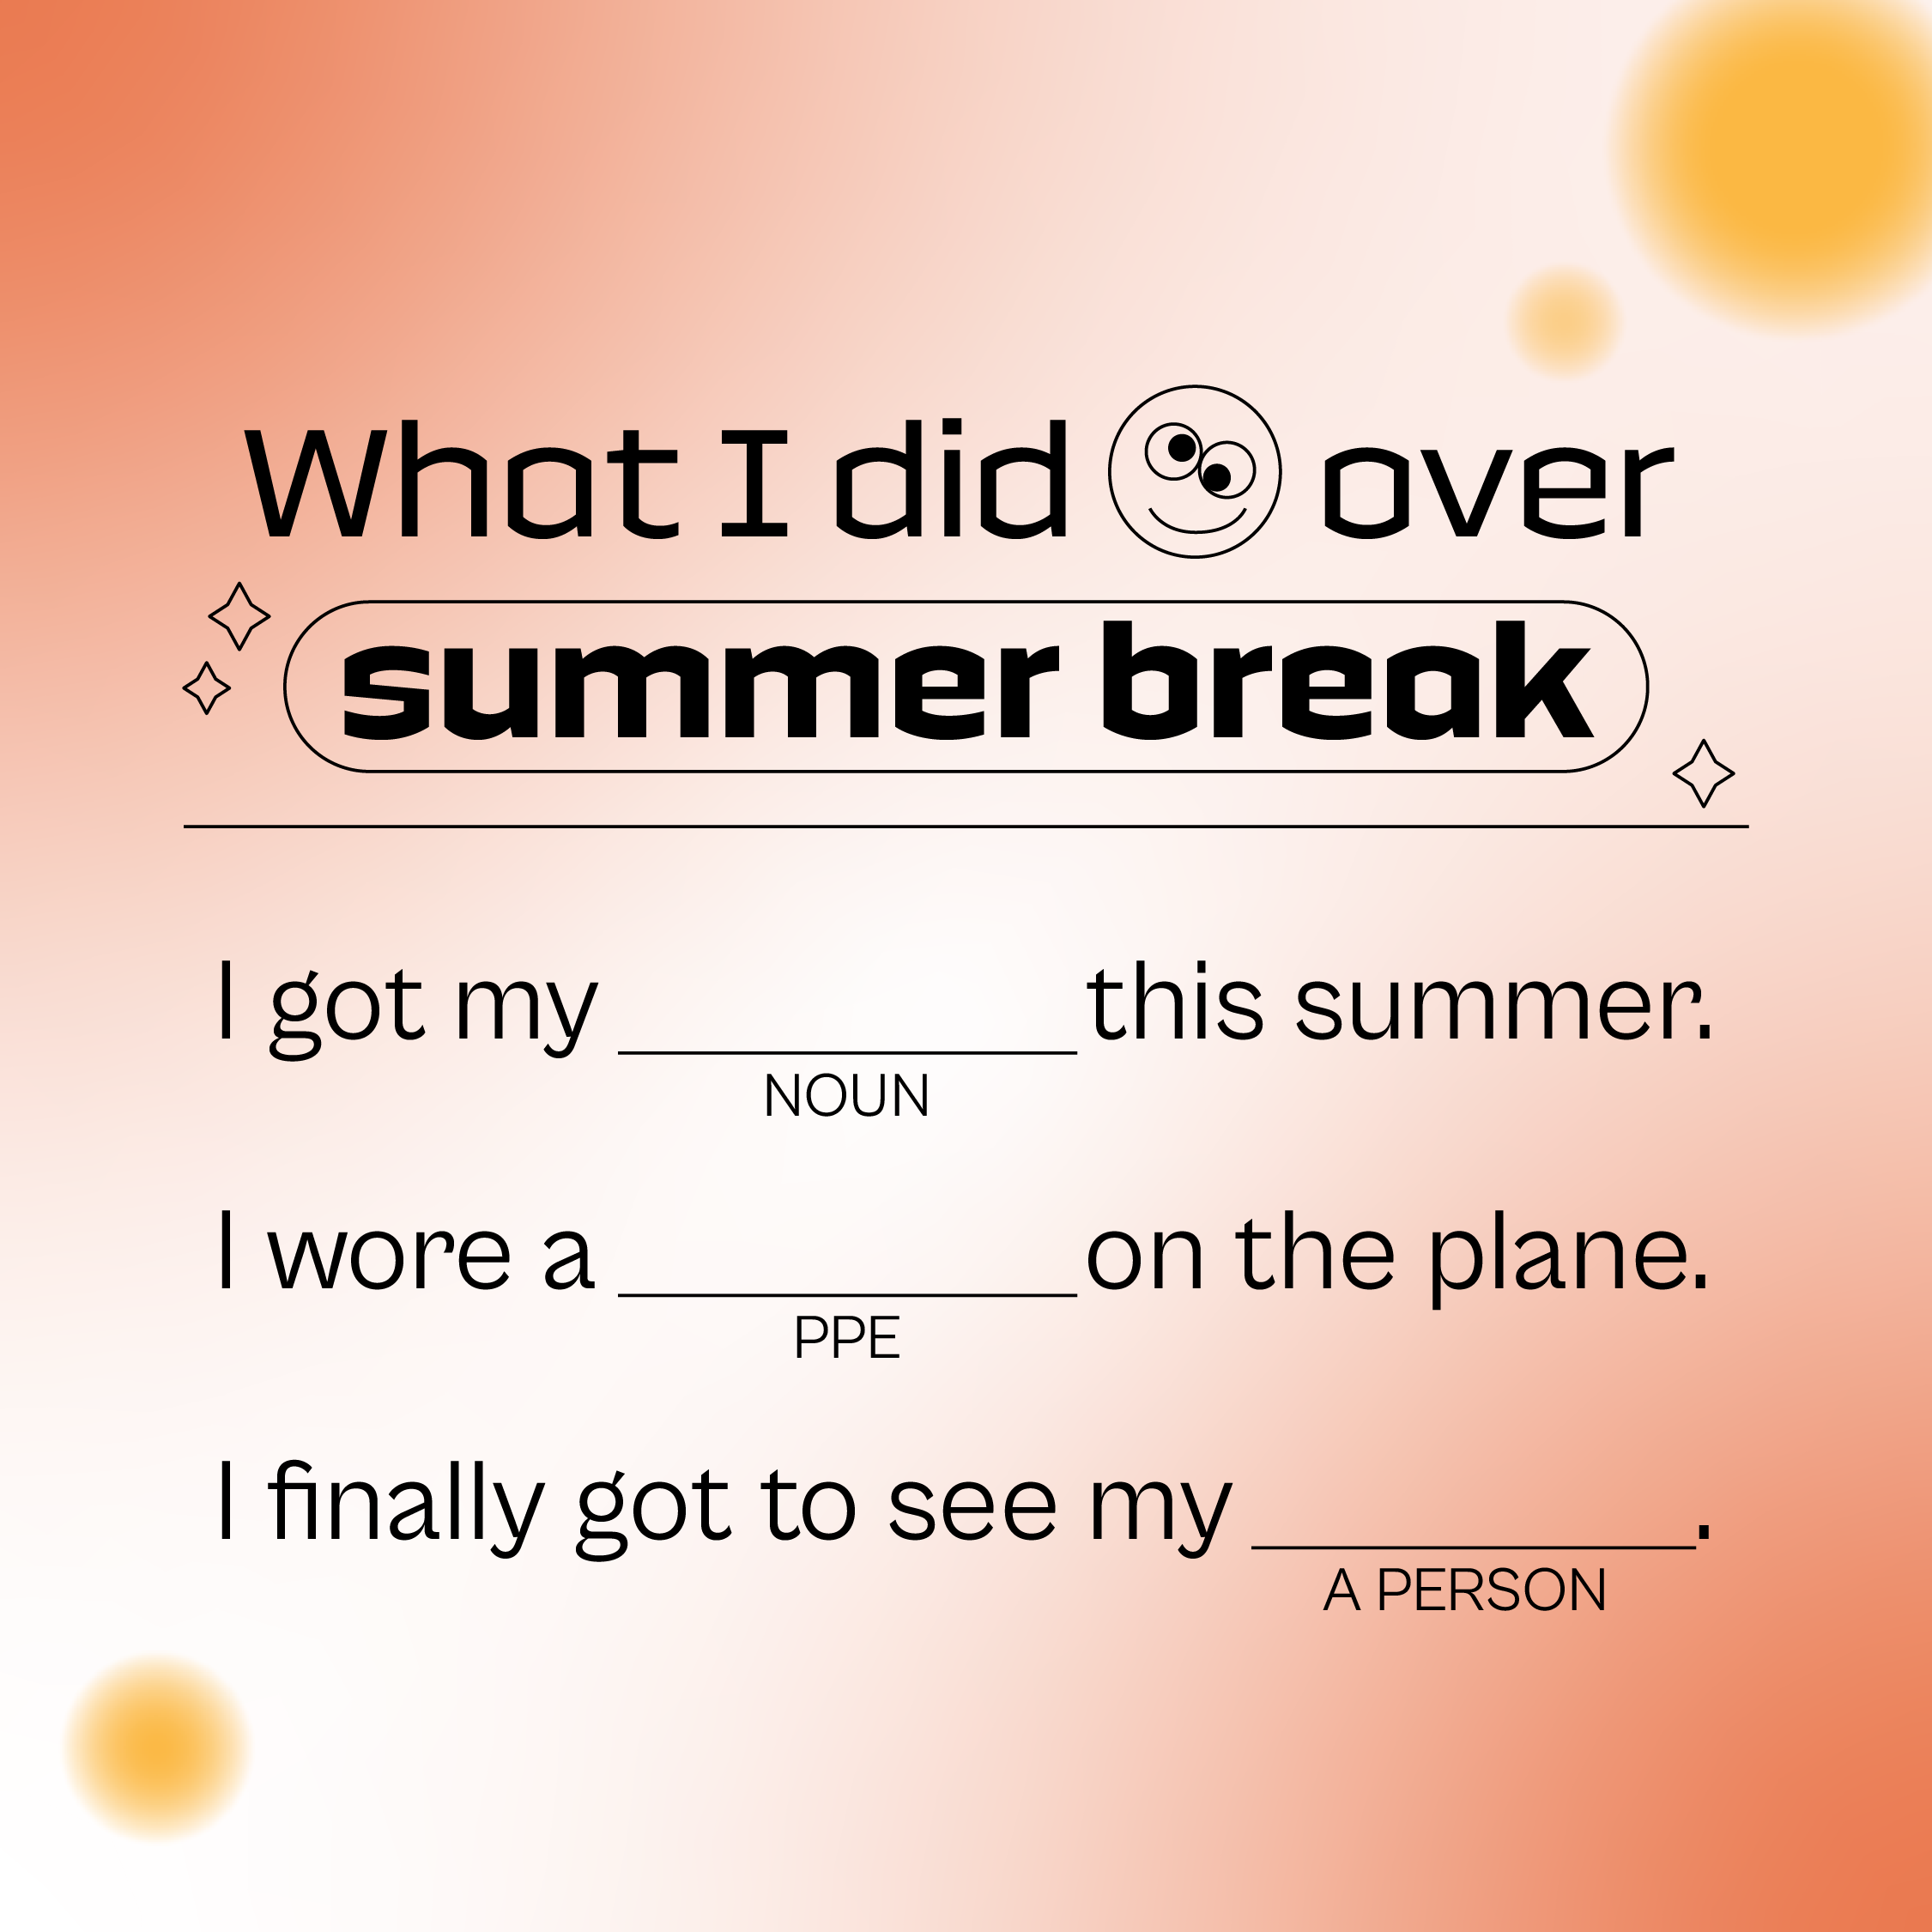 social-media-graphic-with-fill-in-the-blank-word-game-about-safe-summer-travel-english